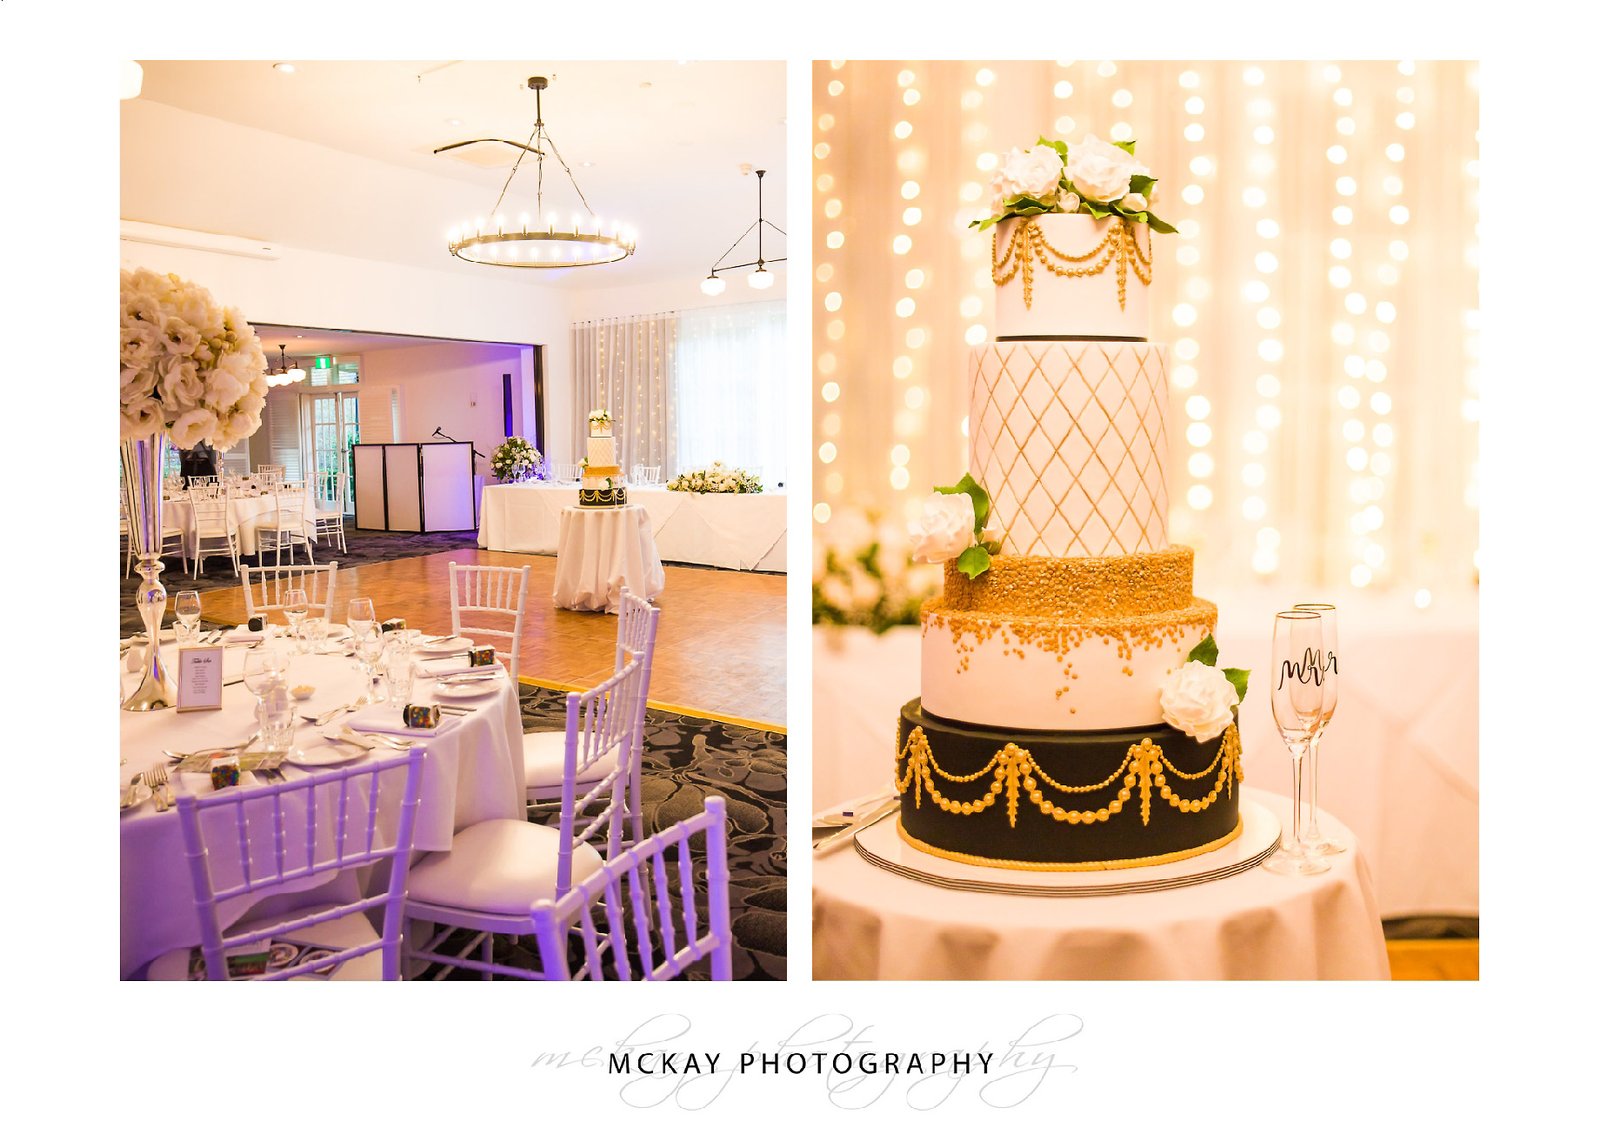 Wedding cake and room details